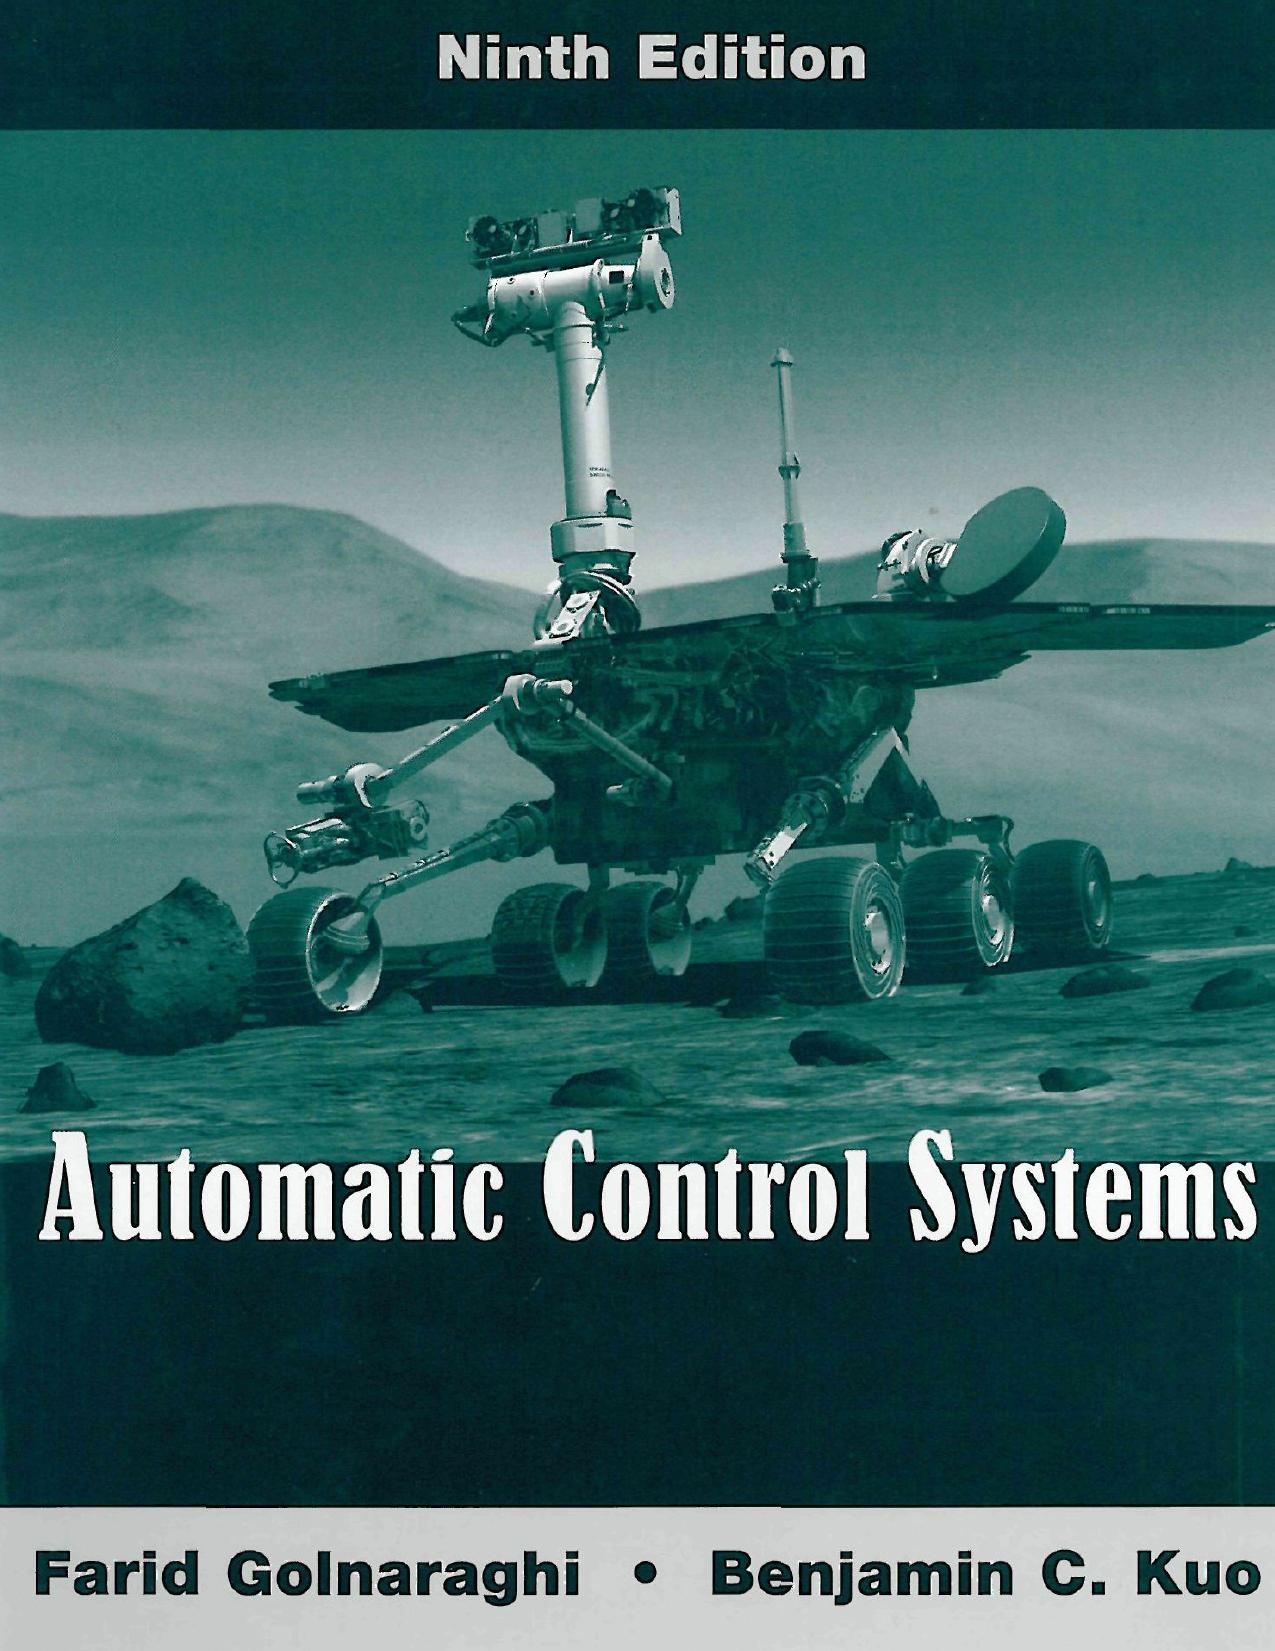 Automatic Control Systems, 9th Edition by Control Systems